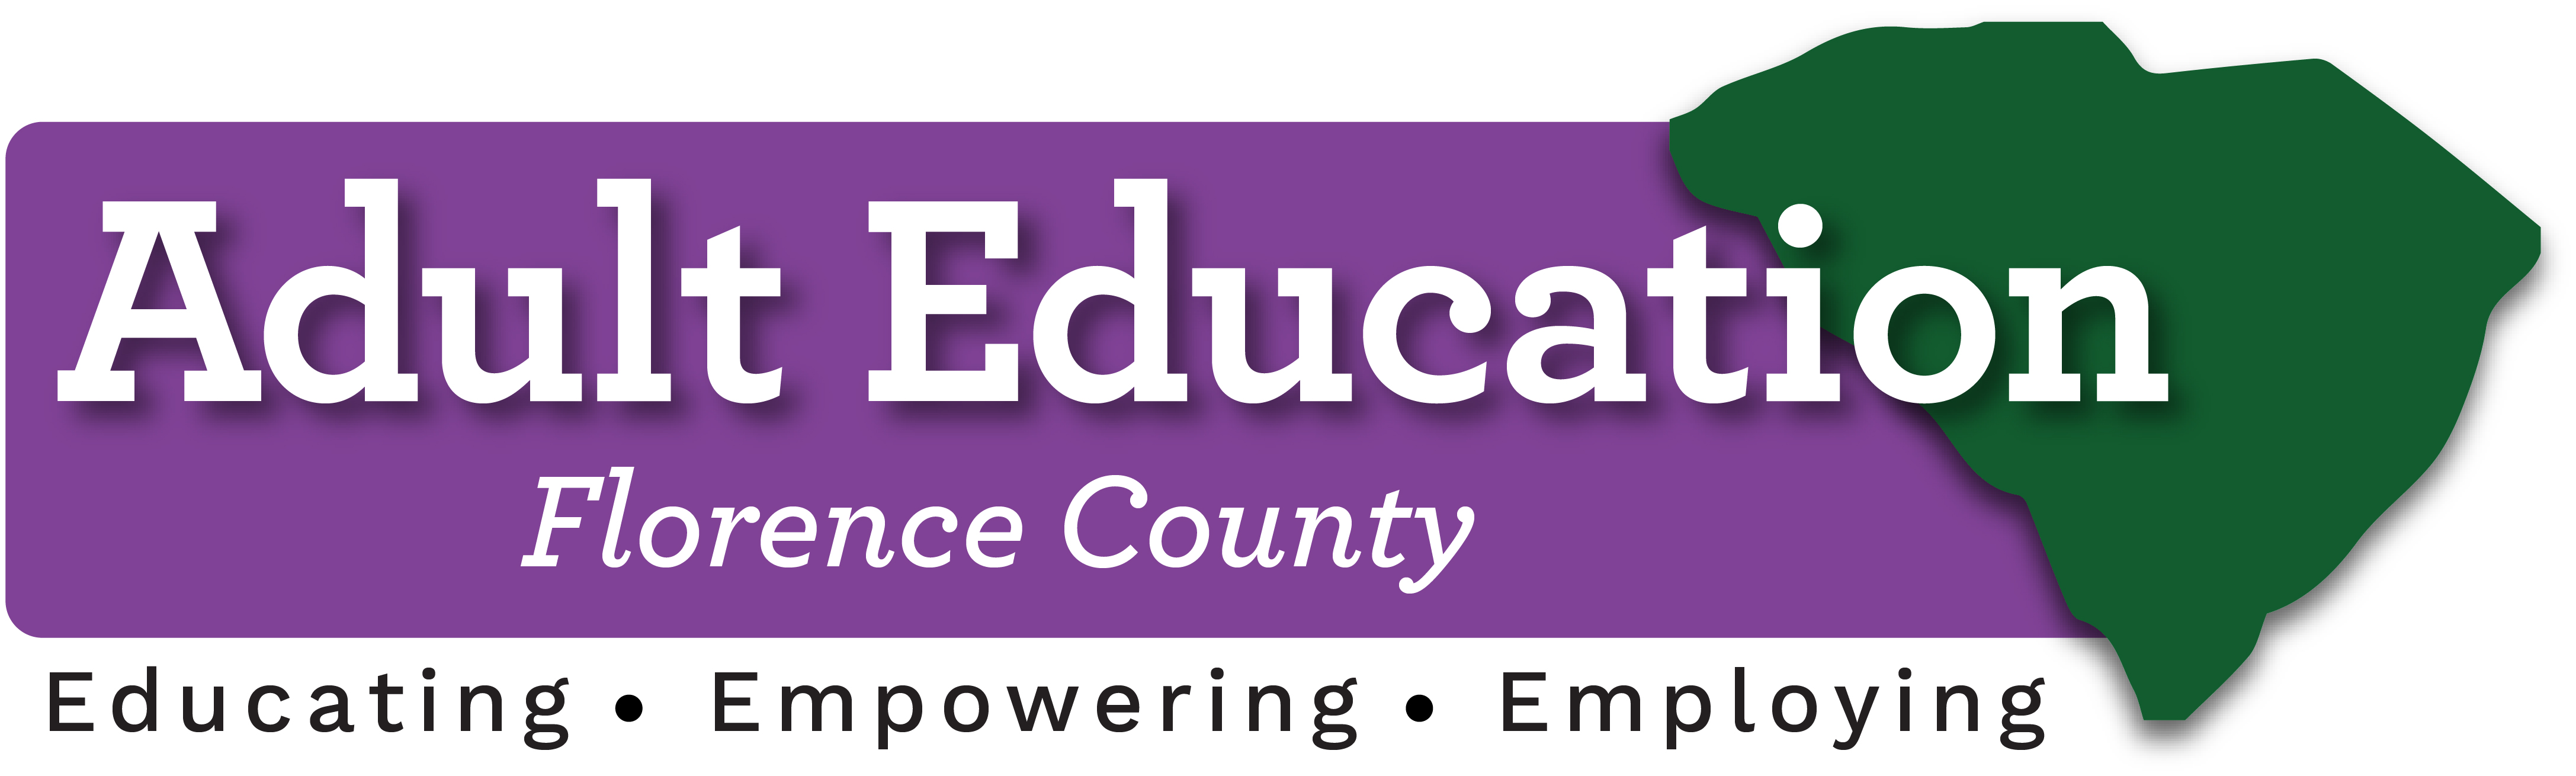 Florence County Adult Education logo